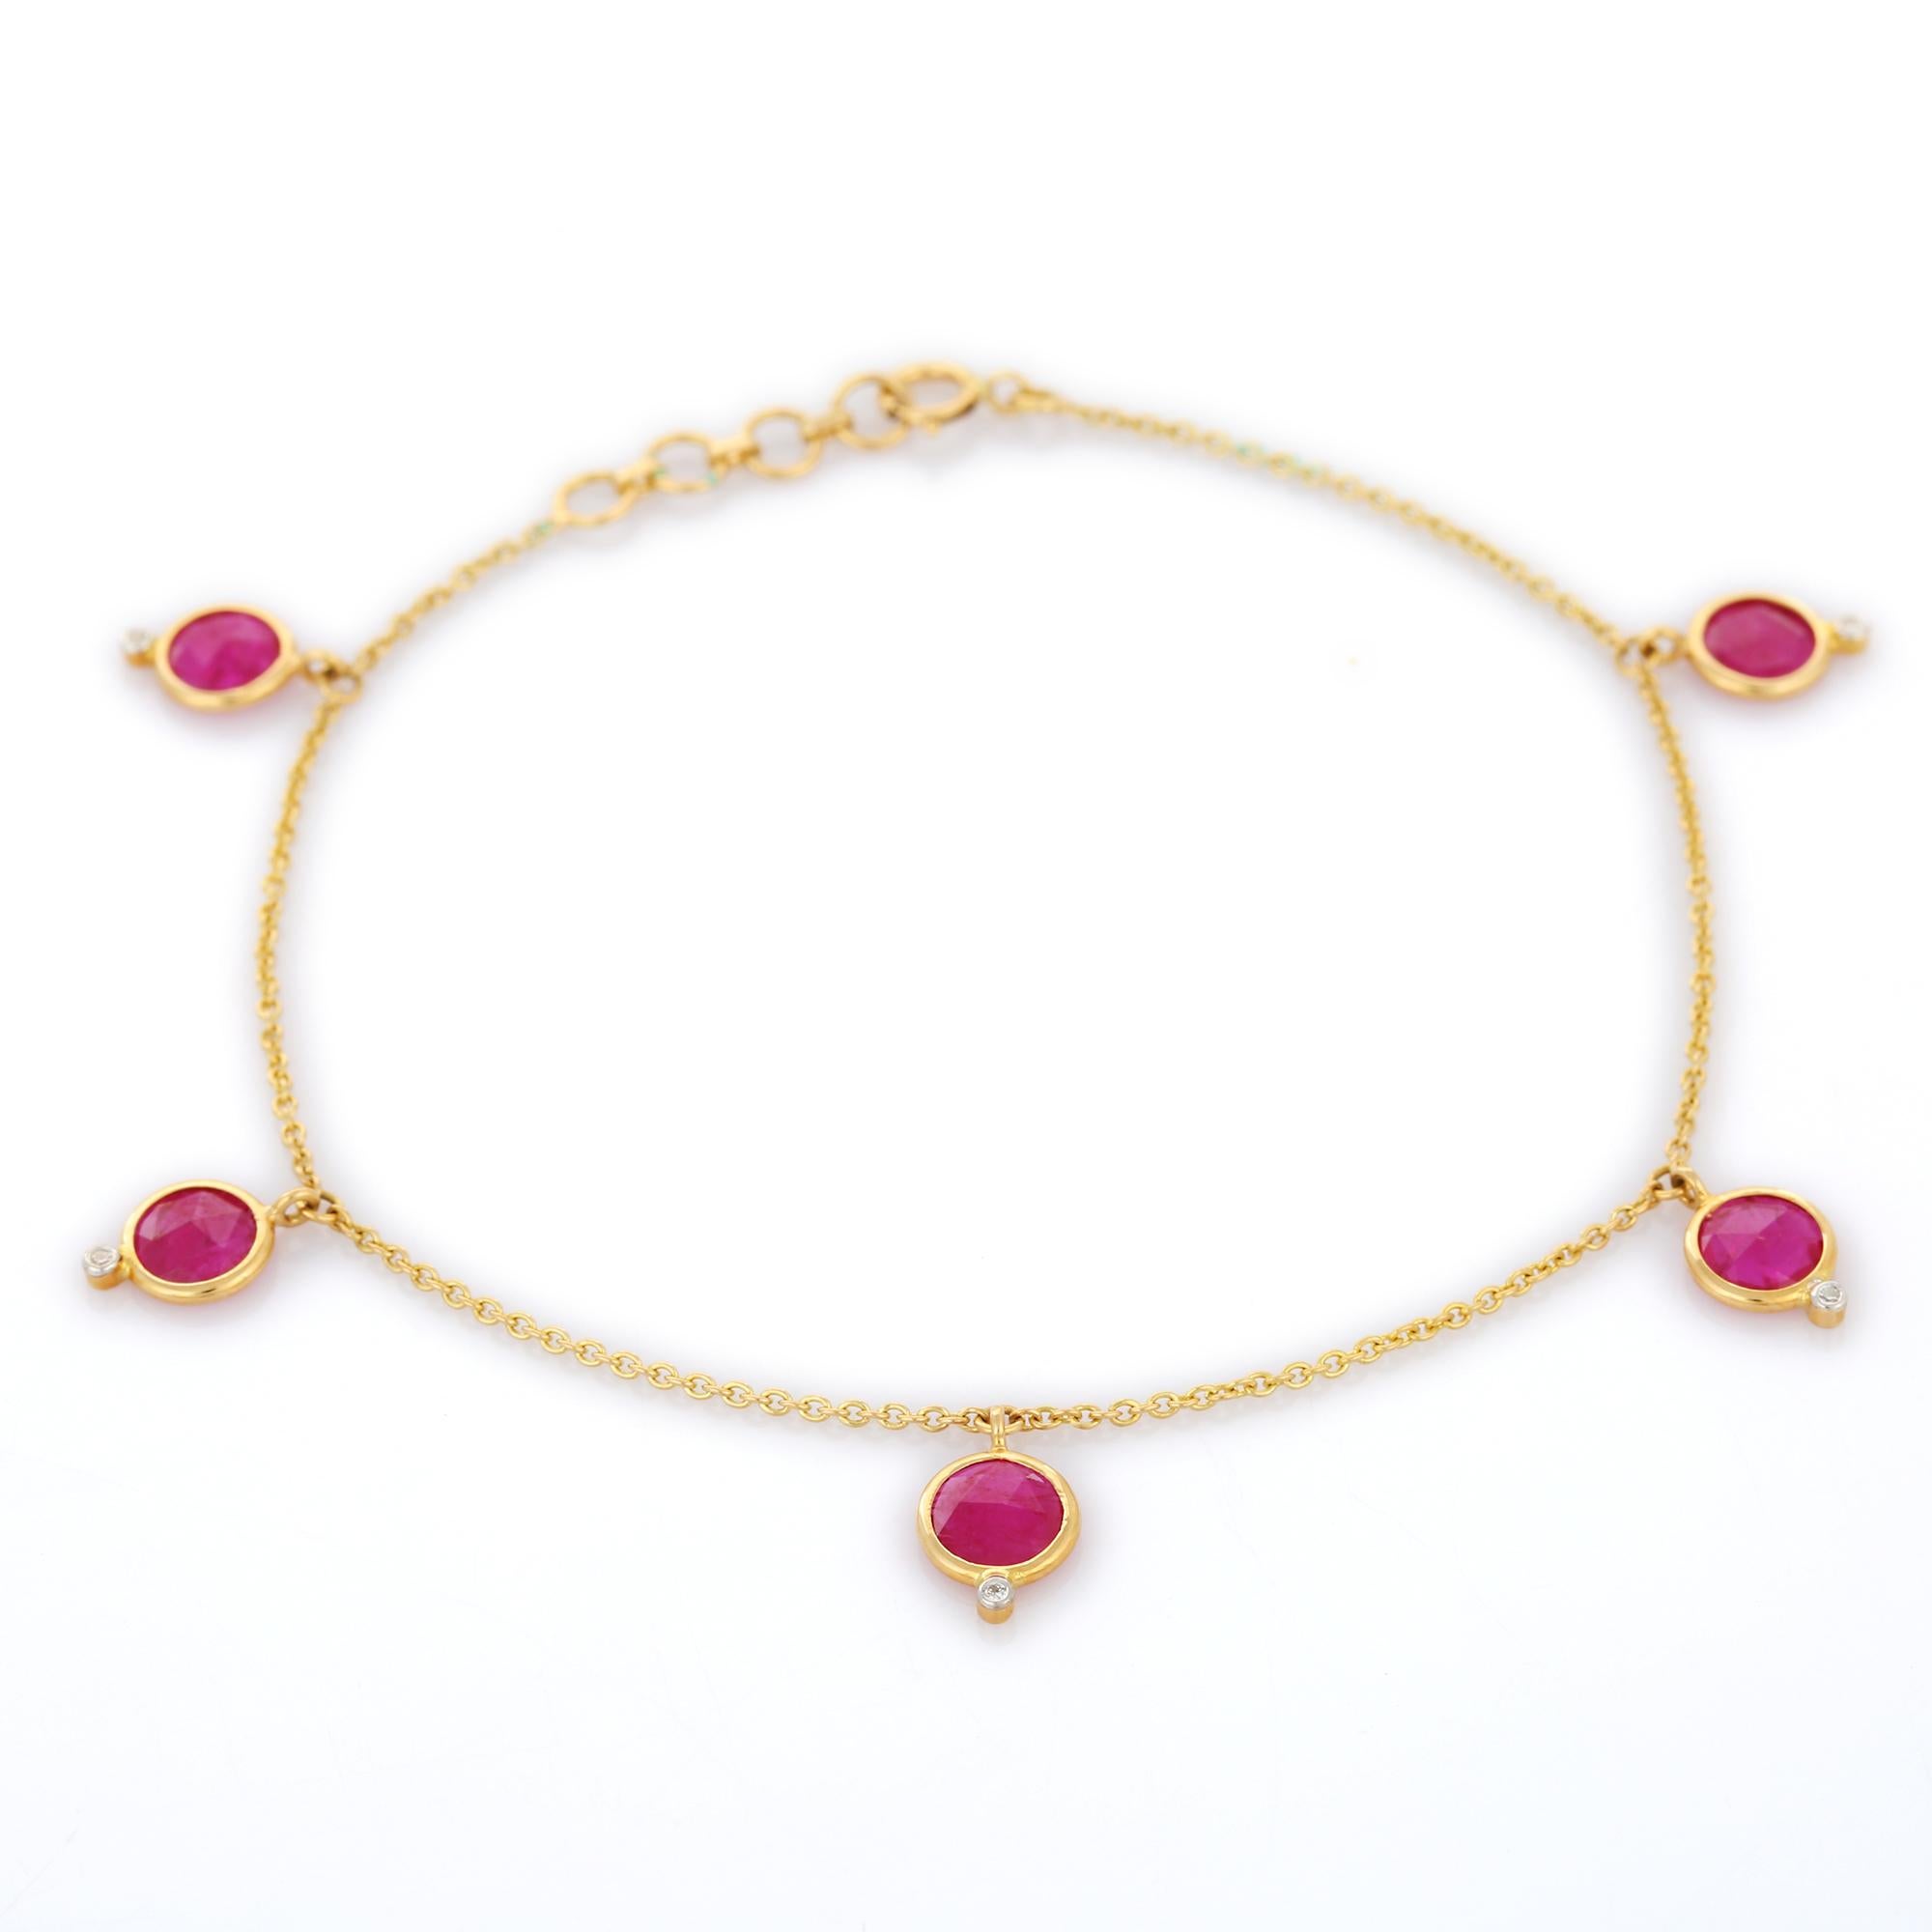 Women's 18K Yellow Gold Chain Bracelet with Dangling Ruby Diamond Charm For Sale